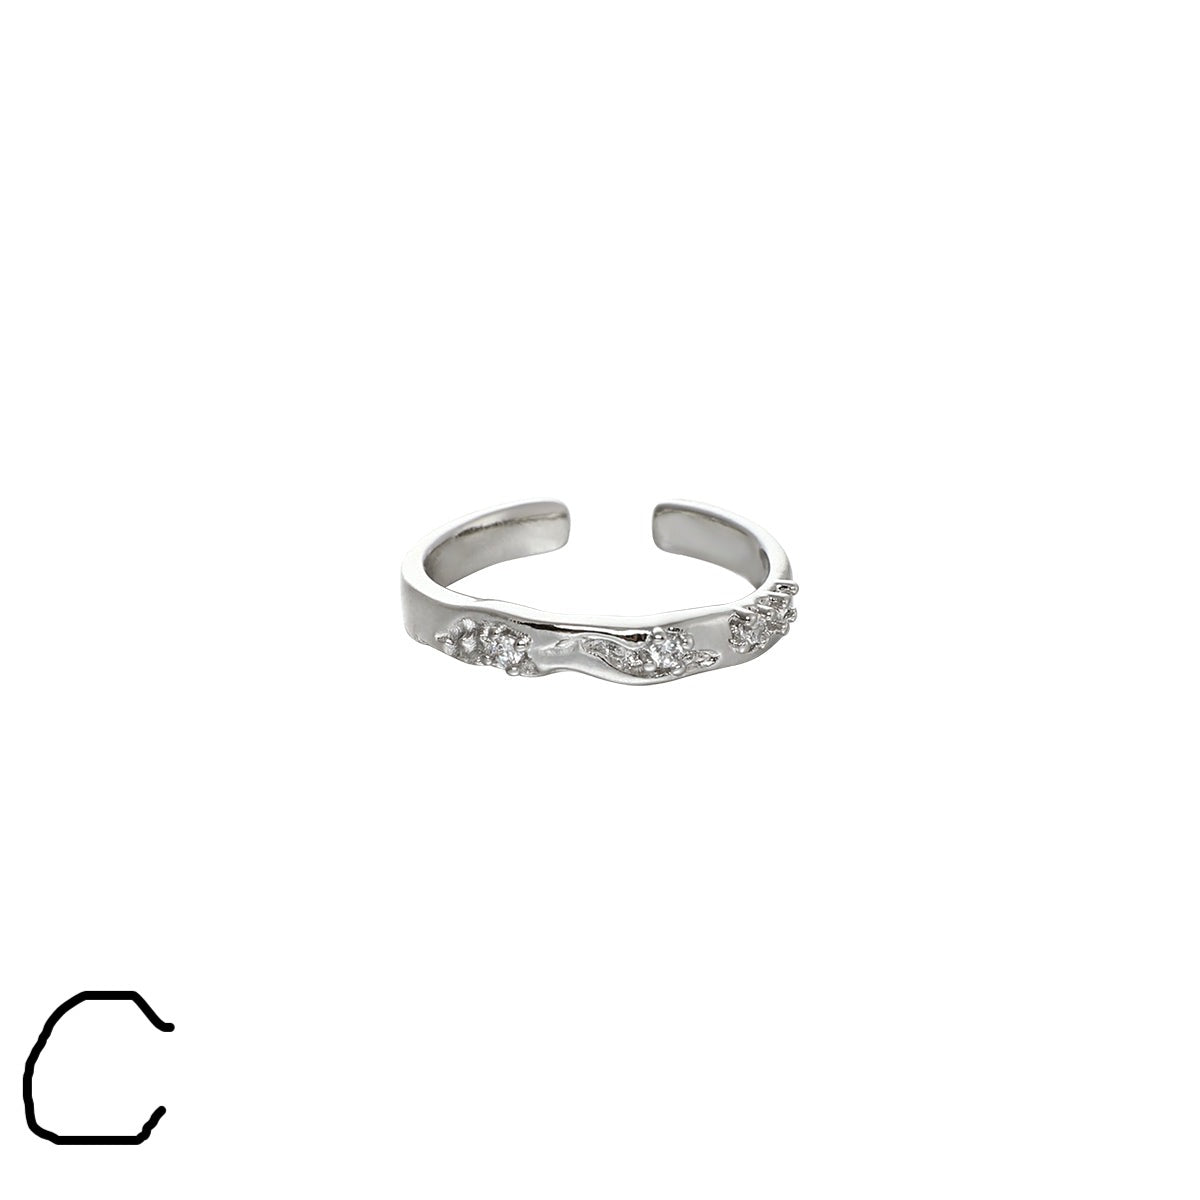 Minimalist Neutral Style Personalized Ring